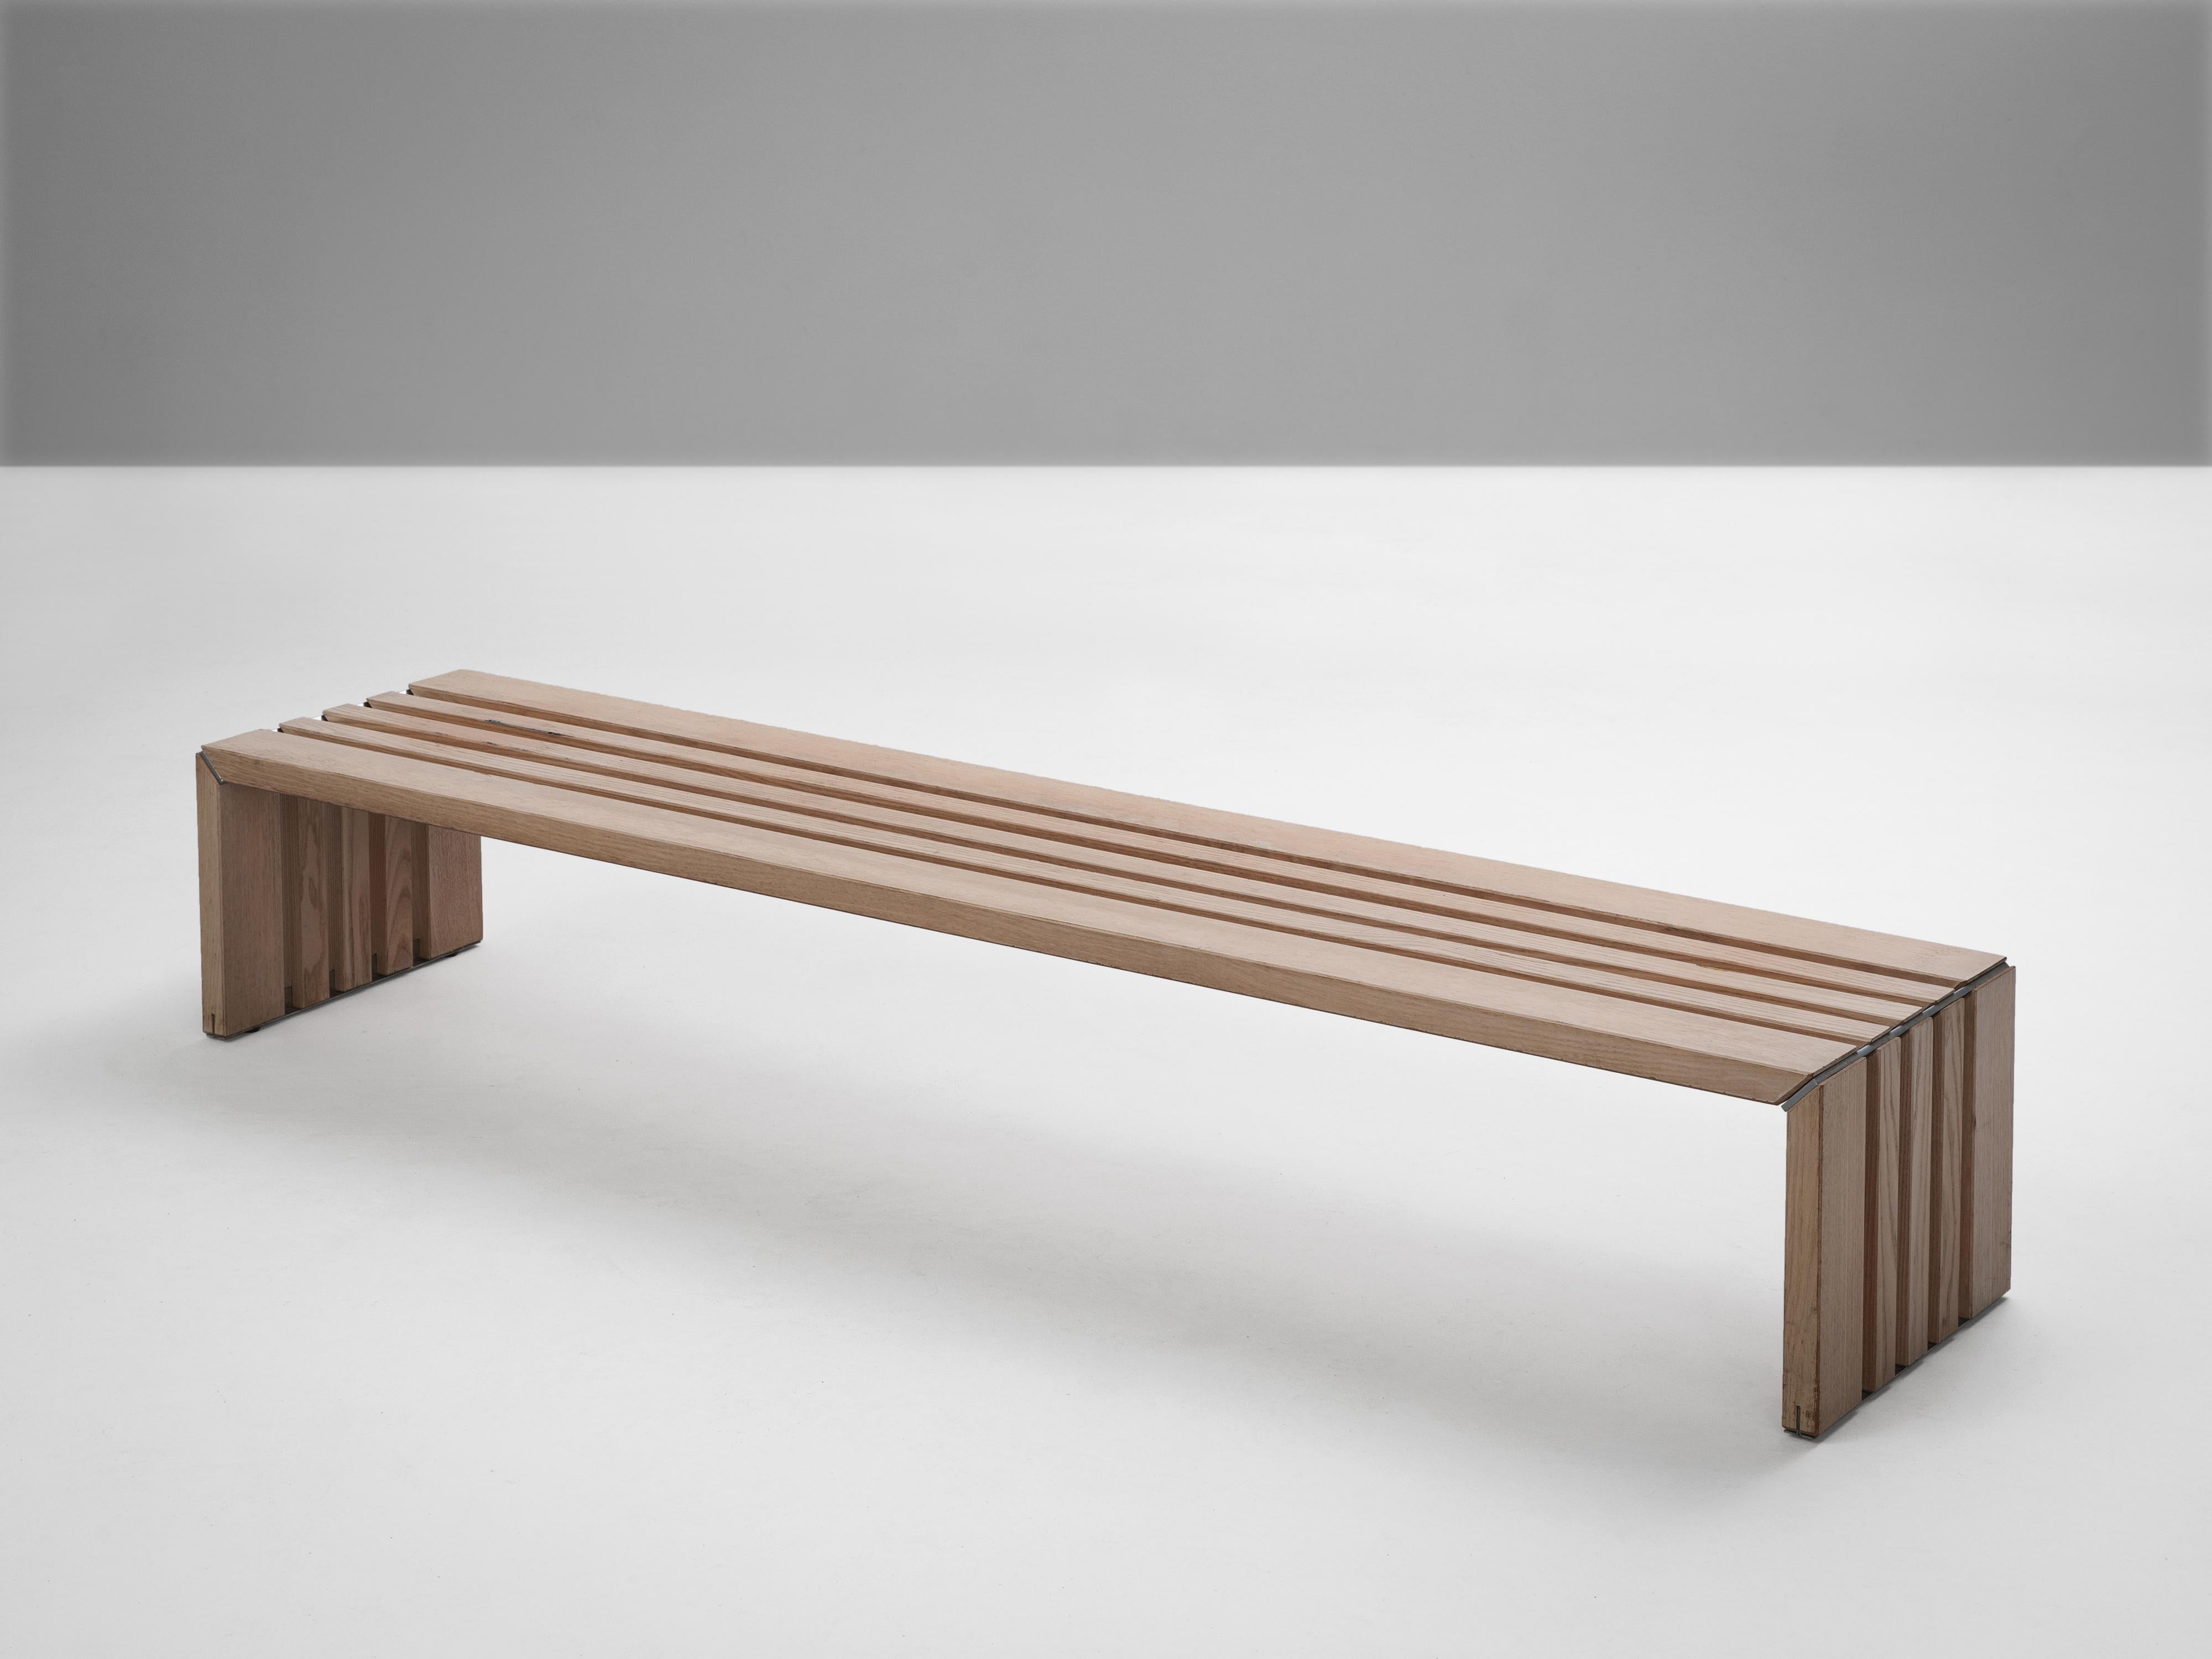 Walter Antonis for 't Spectrum, bench, ash, metal, The Netherlands, 1969.

From the ‘Passe-Par-Tout’ series that Walter Antonis designed for ‘t Spectrum originates also this multifunctional bench. Included in the series was this ash wooden bench and